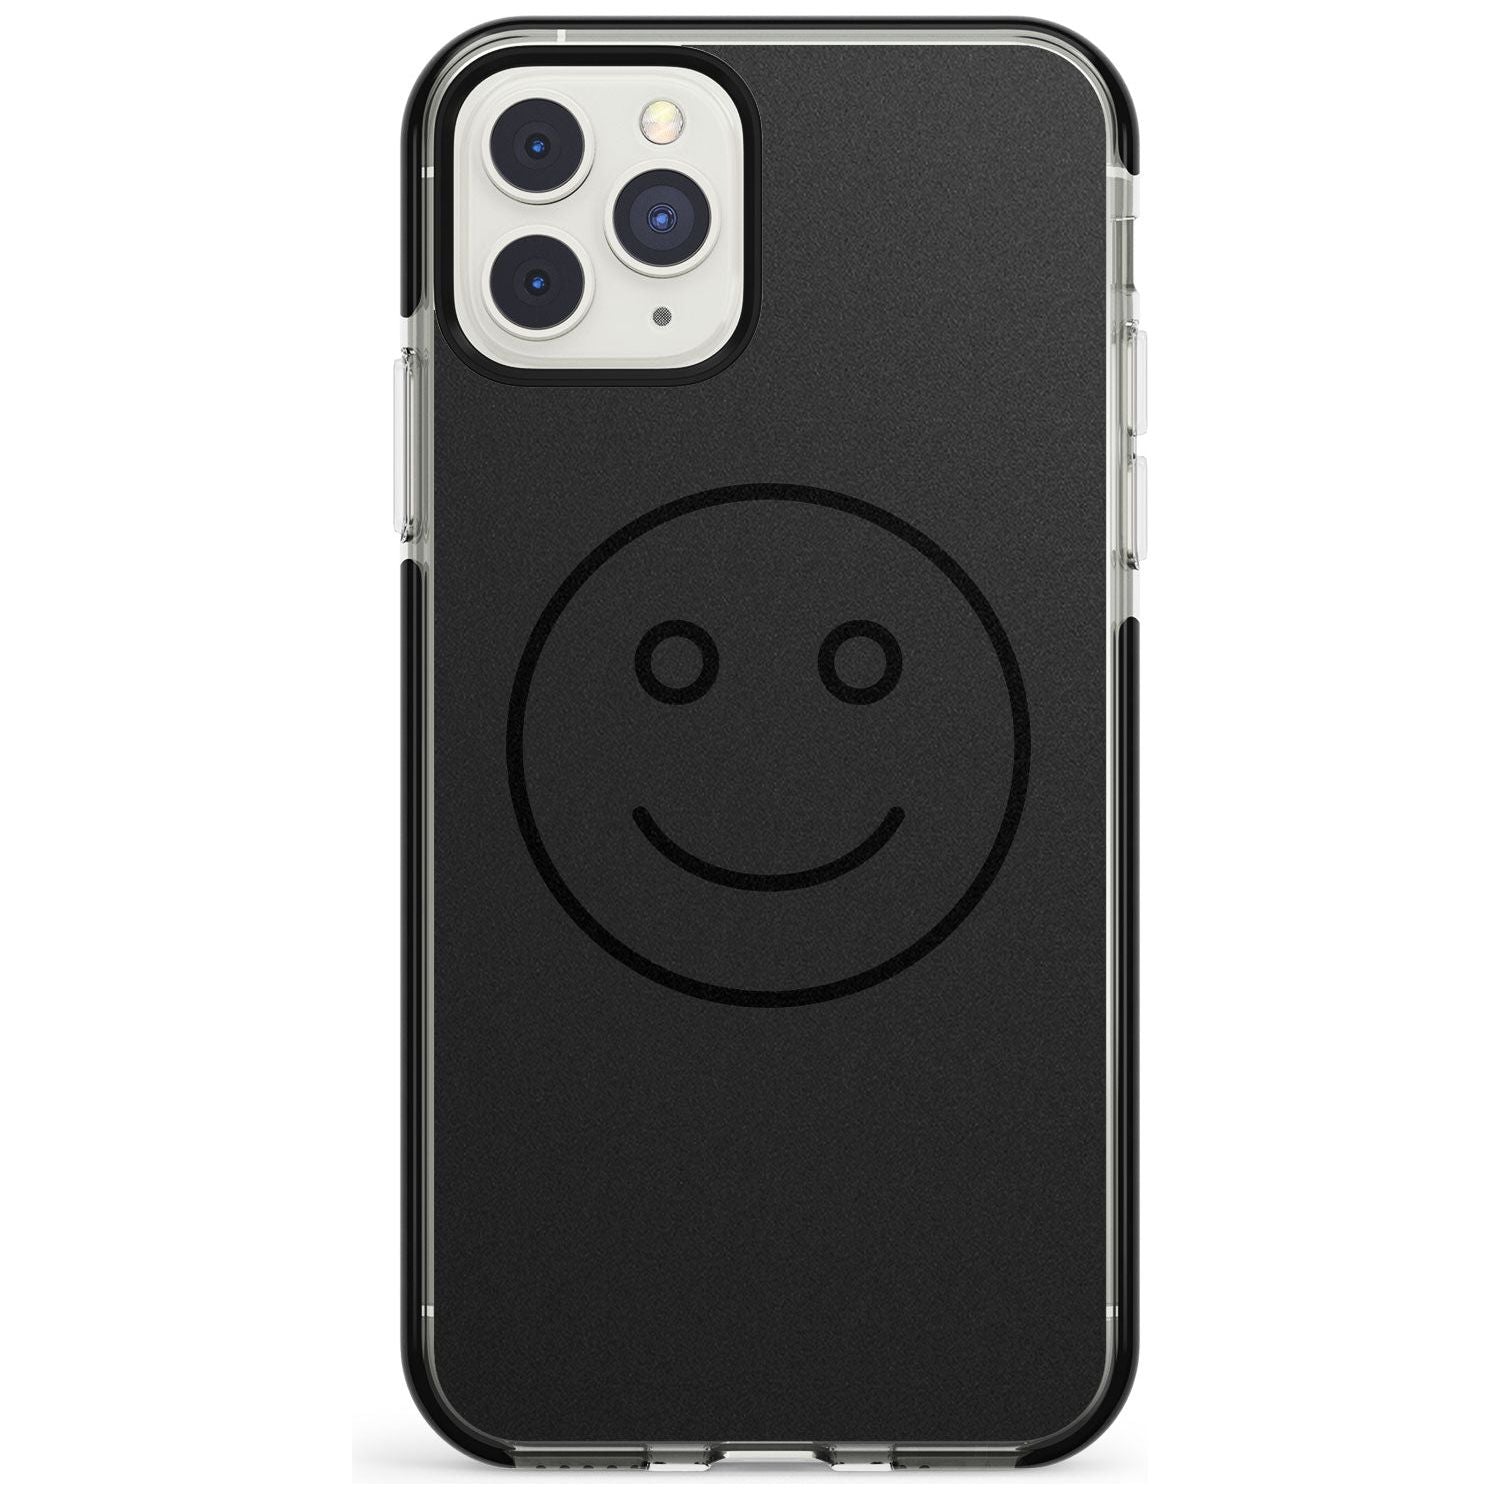 Dark Smiley Face Black Impact Phone Case for iPhone 11 Pro Max